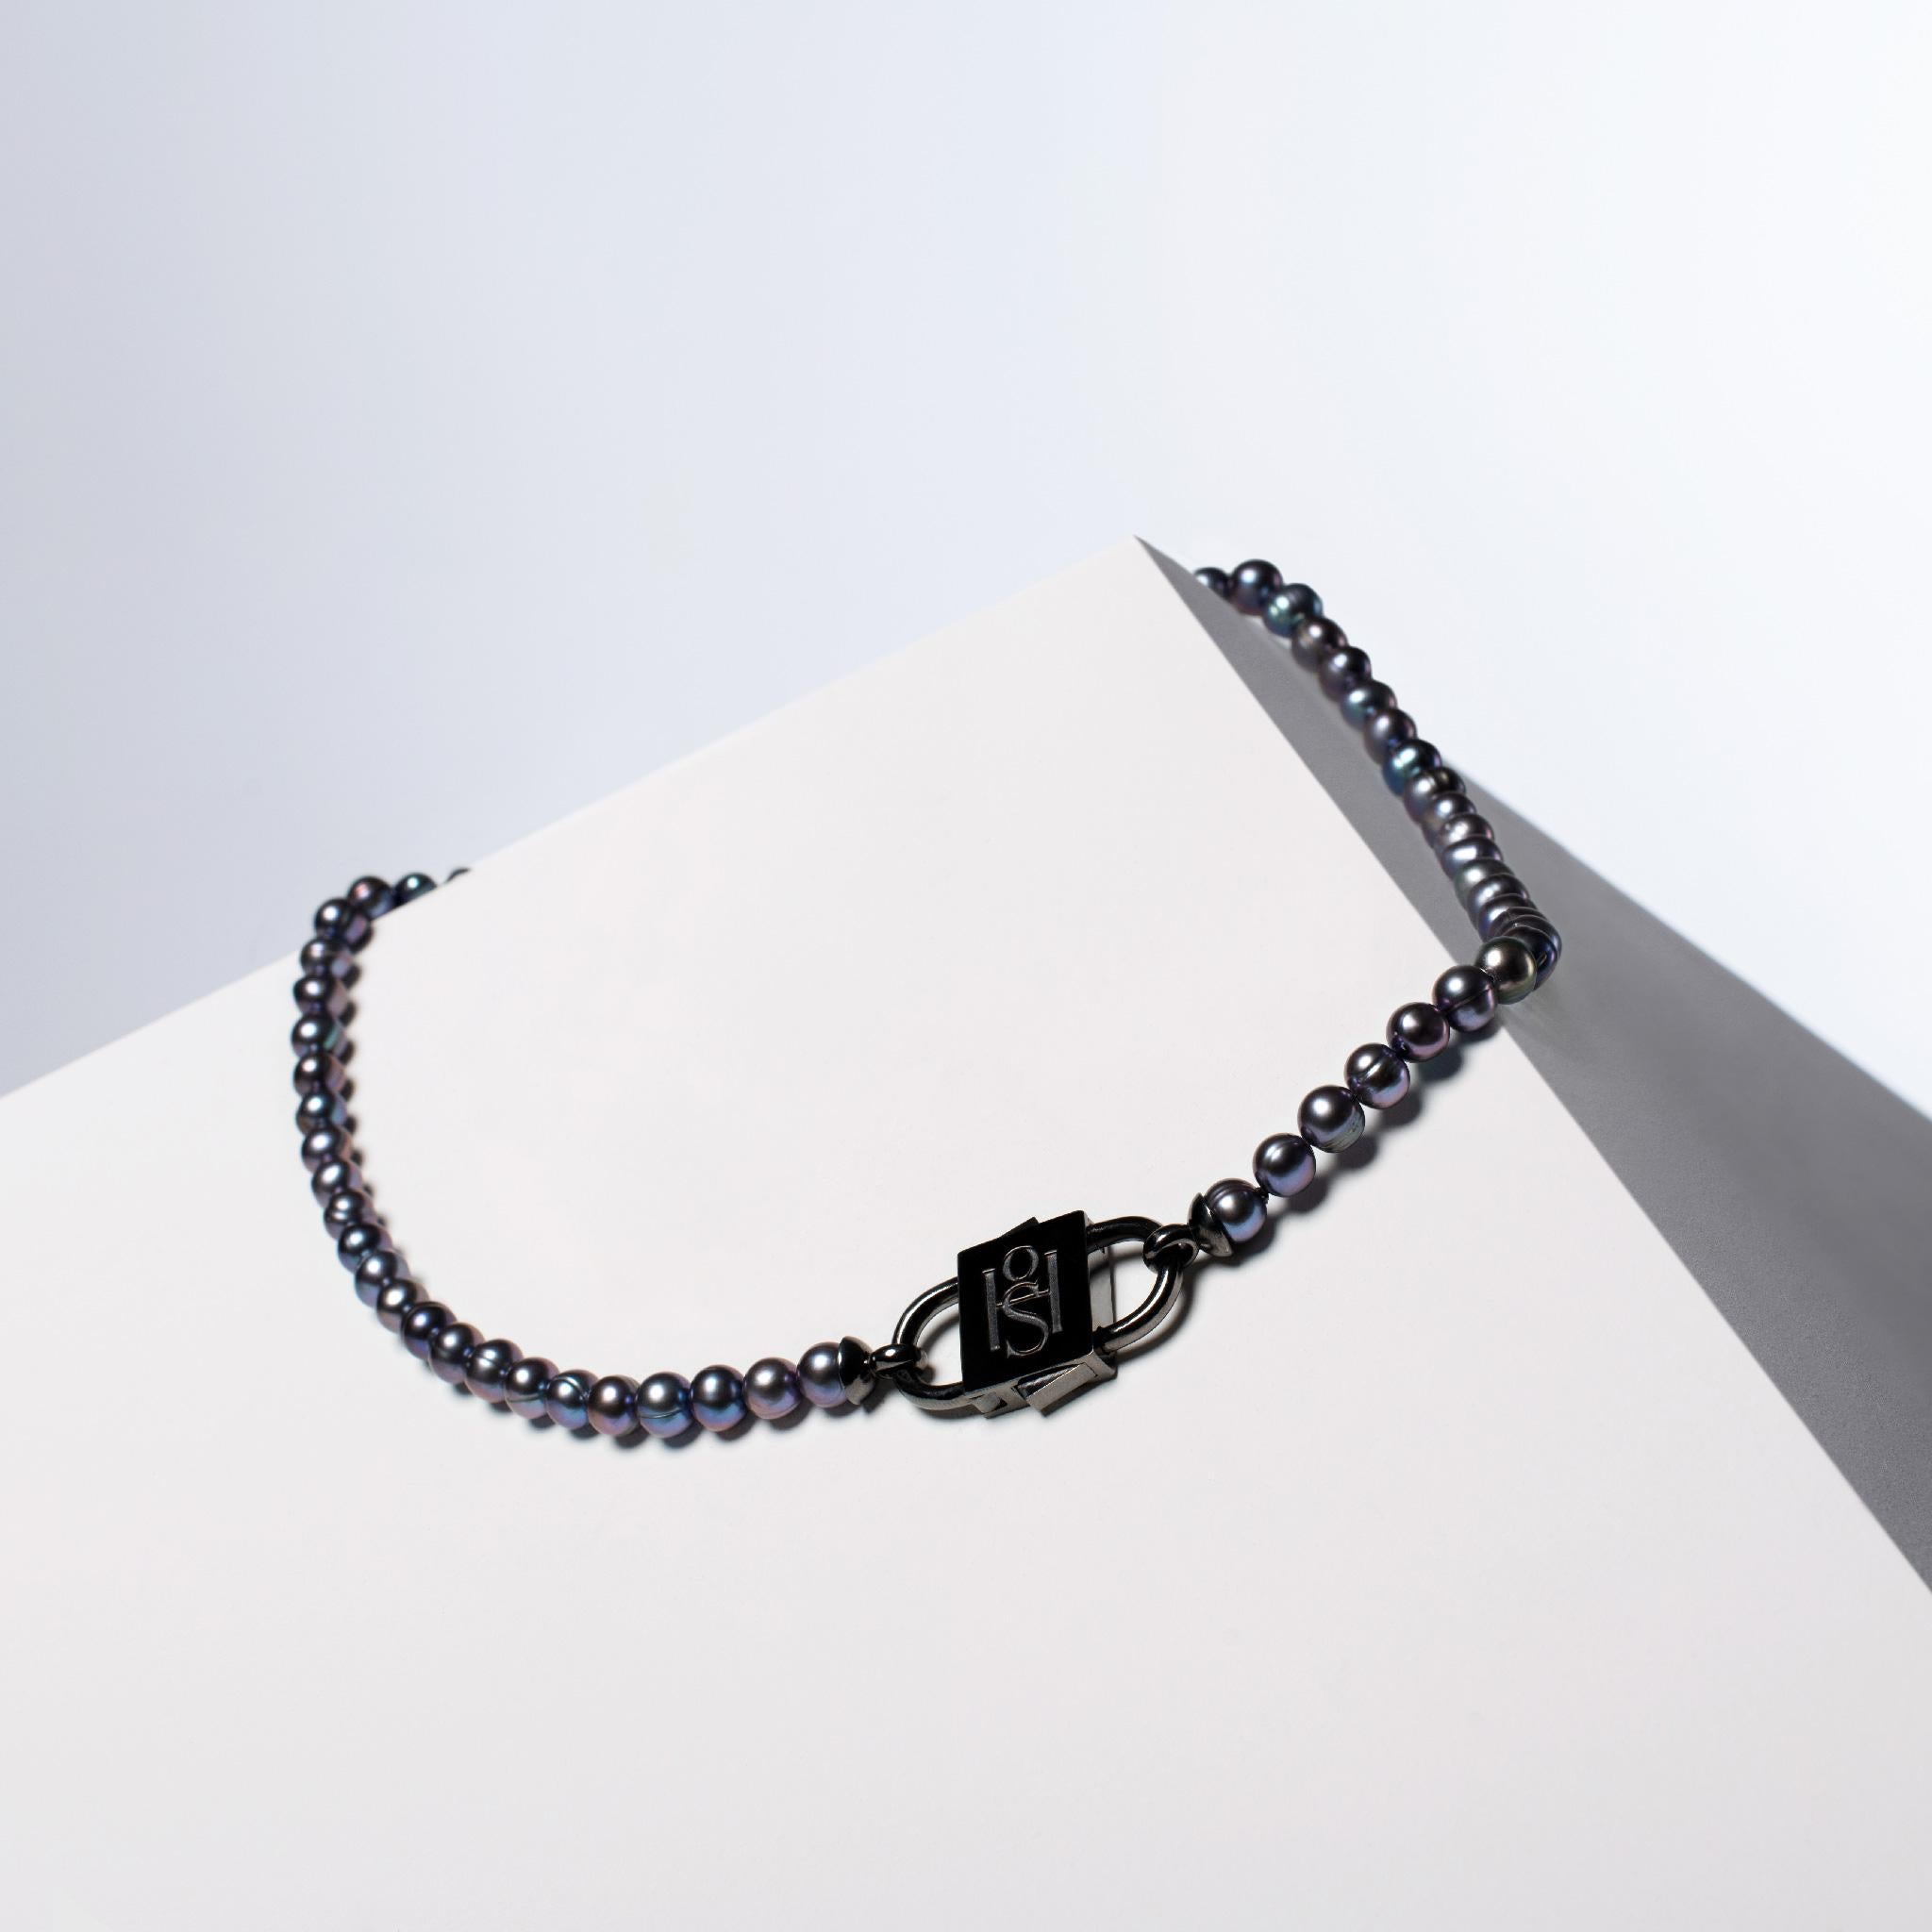 - High-luster near round peacock black pearls, perfectly complemented by the unique 1 micron black rhodium filled 925 sterling silver HoS Lock
- The Pearl Necklace measures 42.5 cm (16.7 inches) in length, offering an ideal size that gracefully